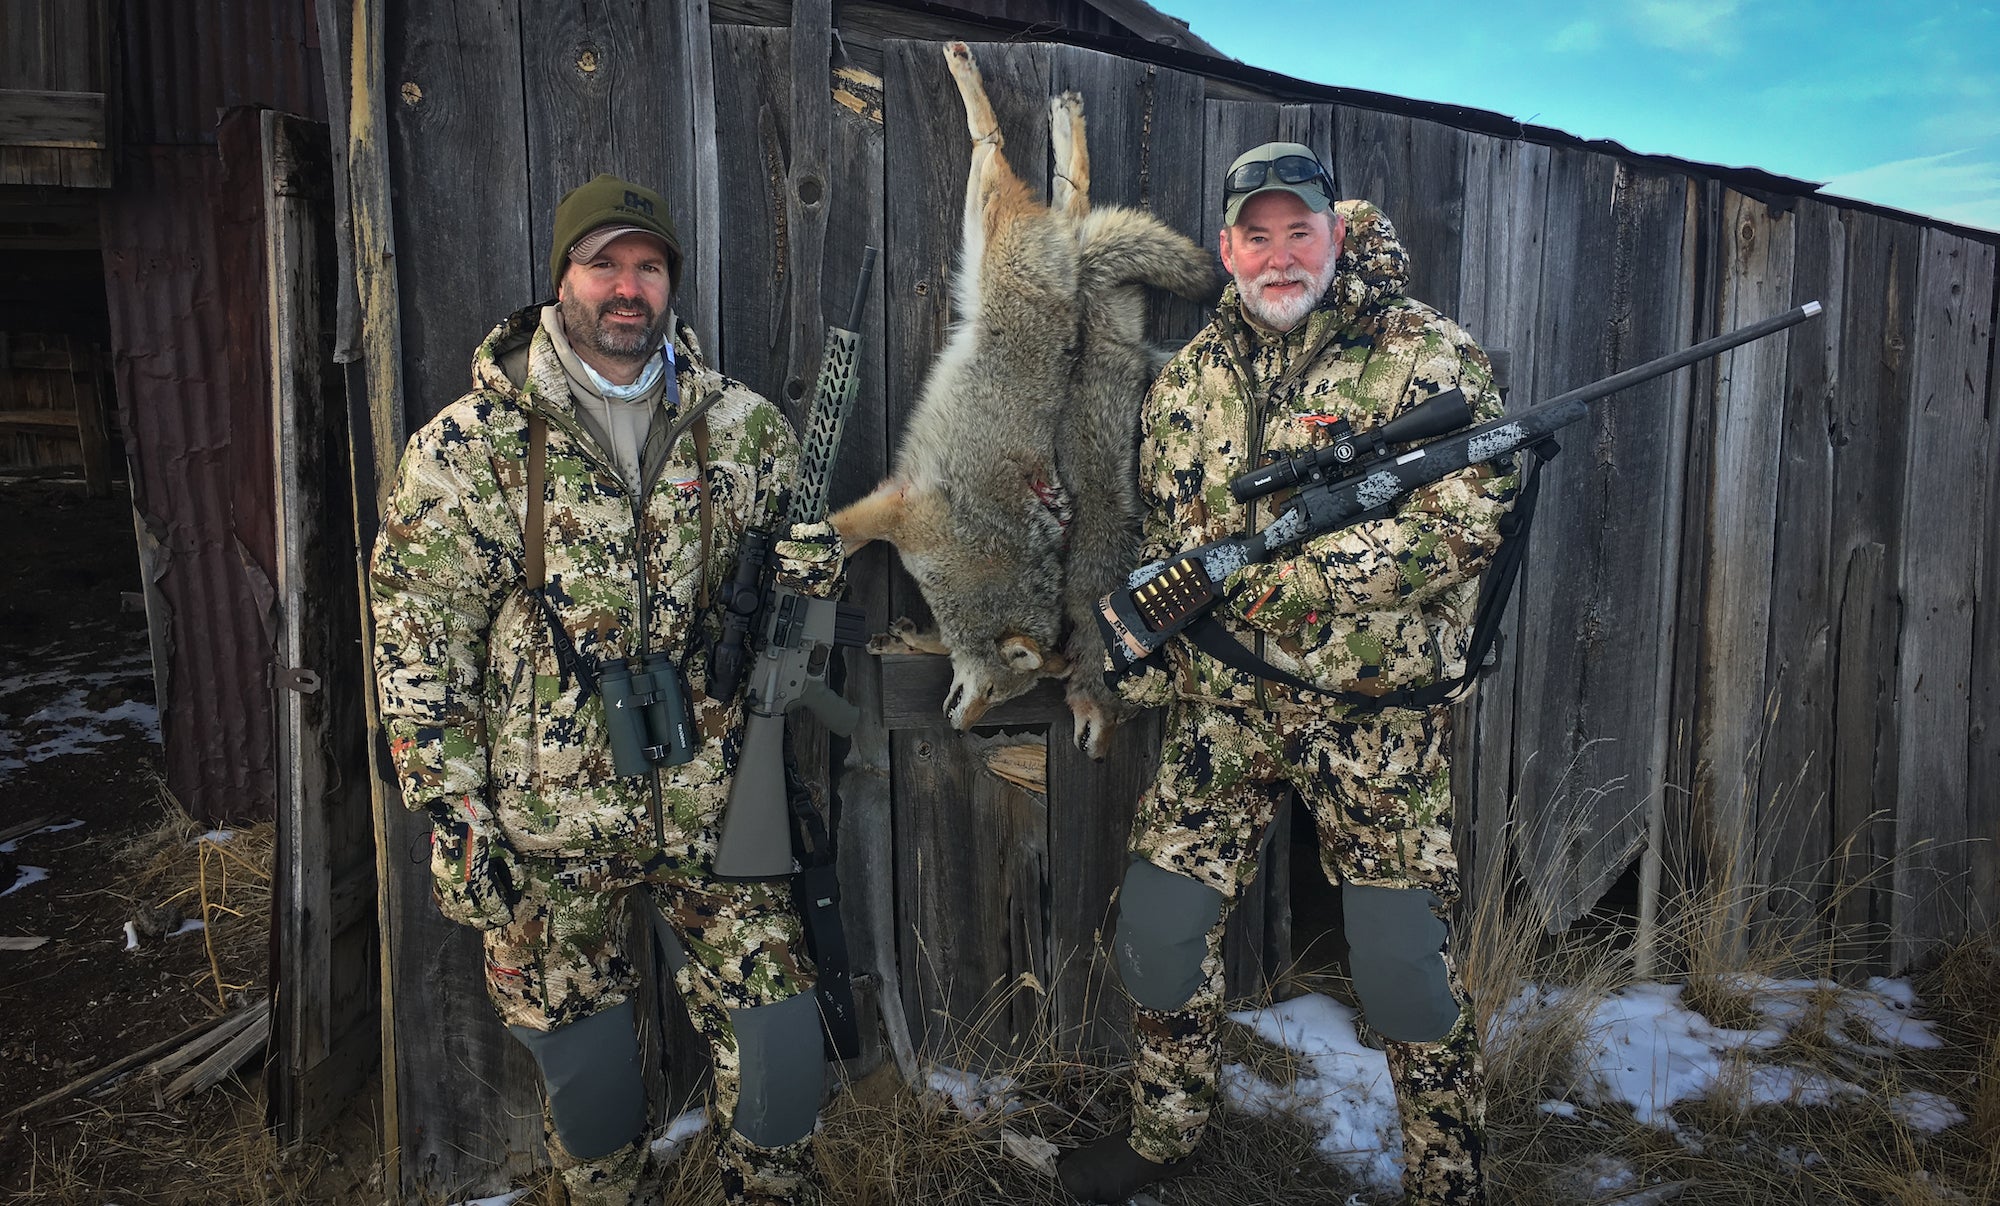 Two men with rifles standing next to dead coyotes.